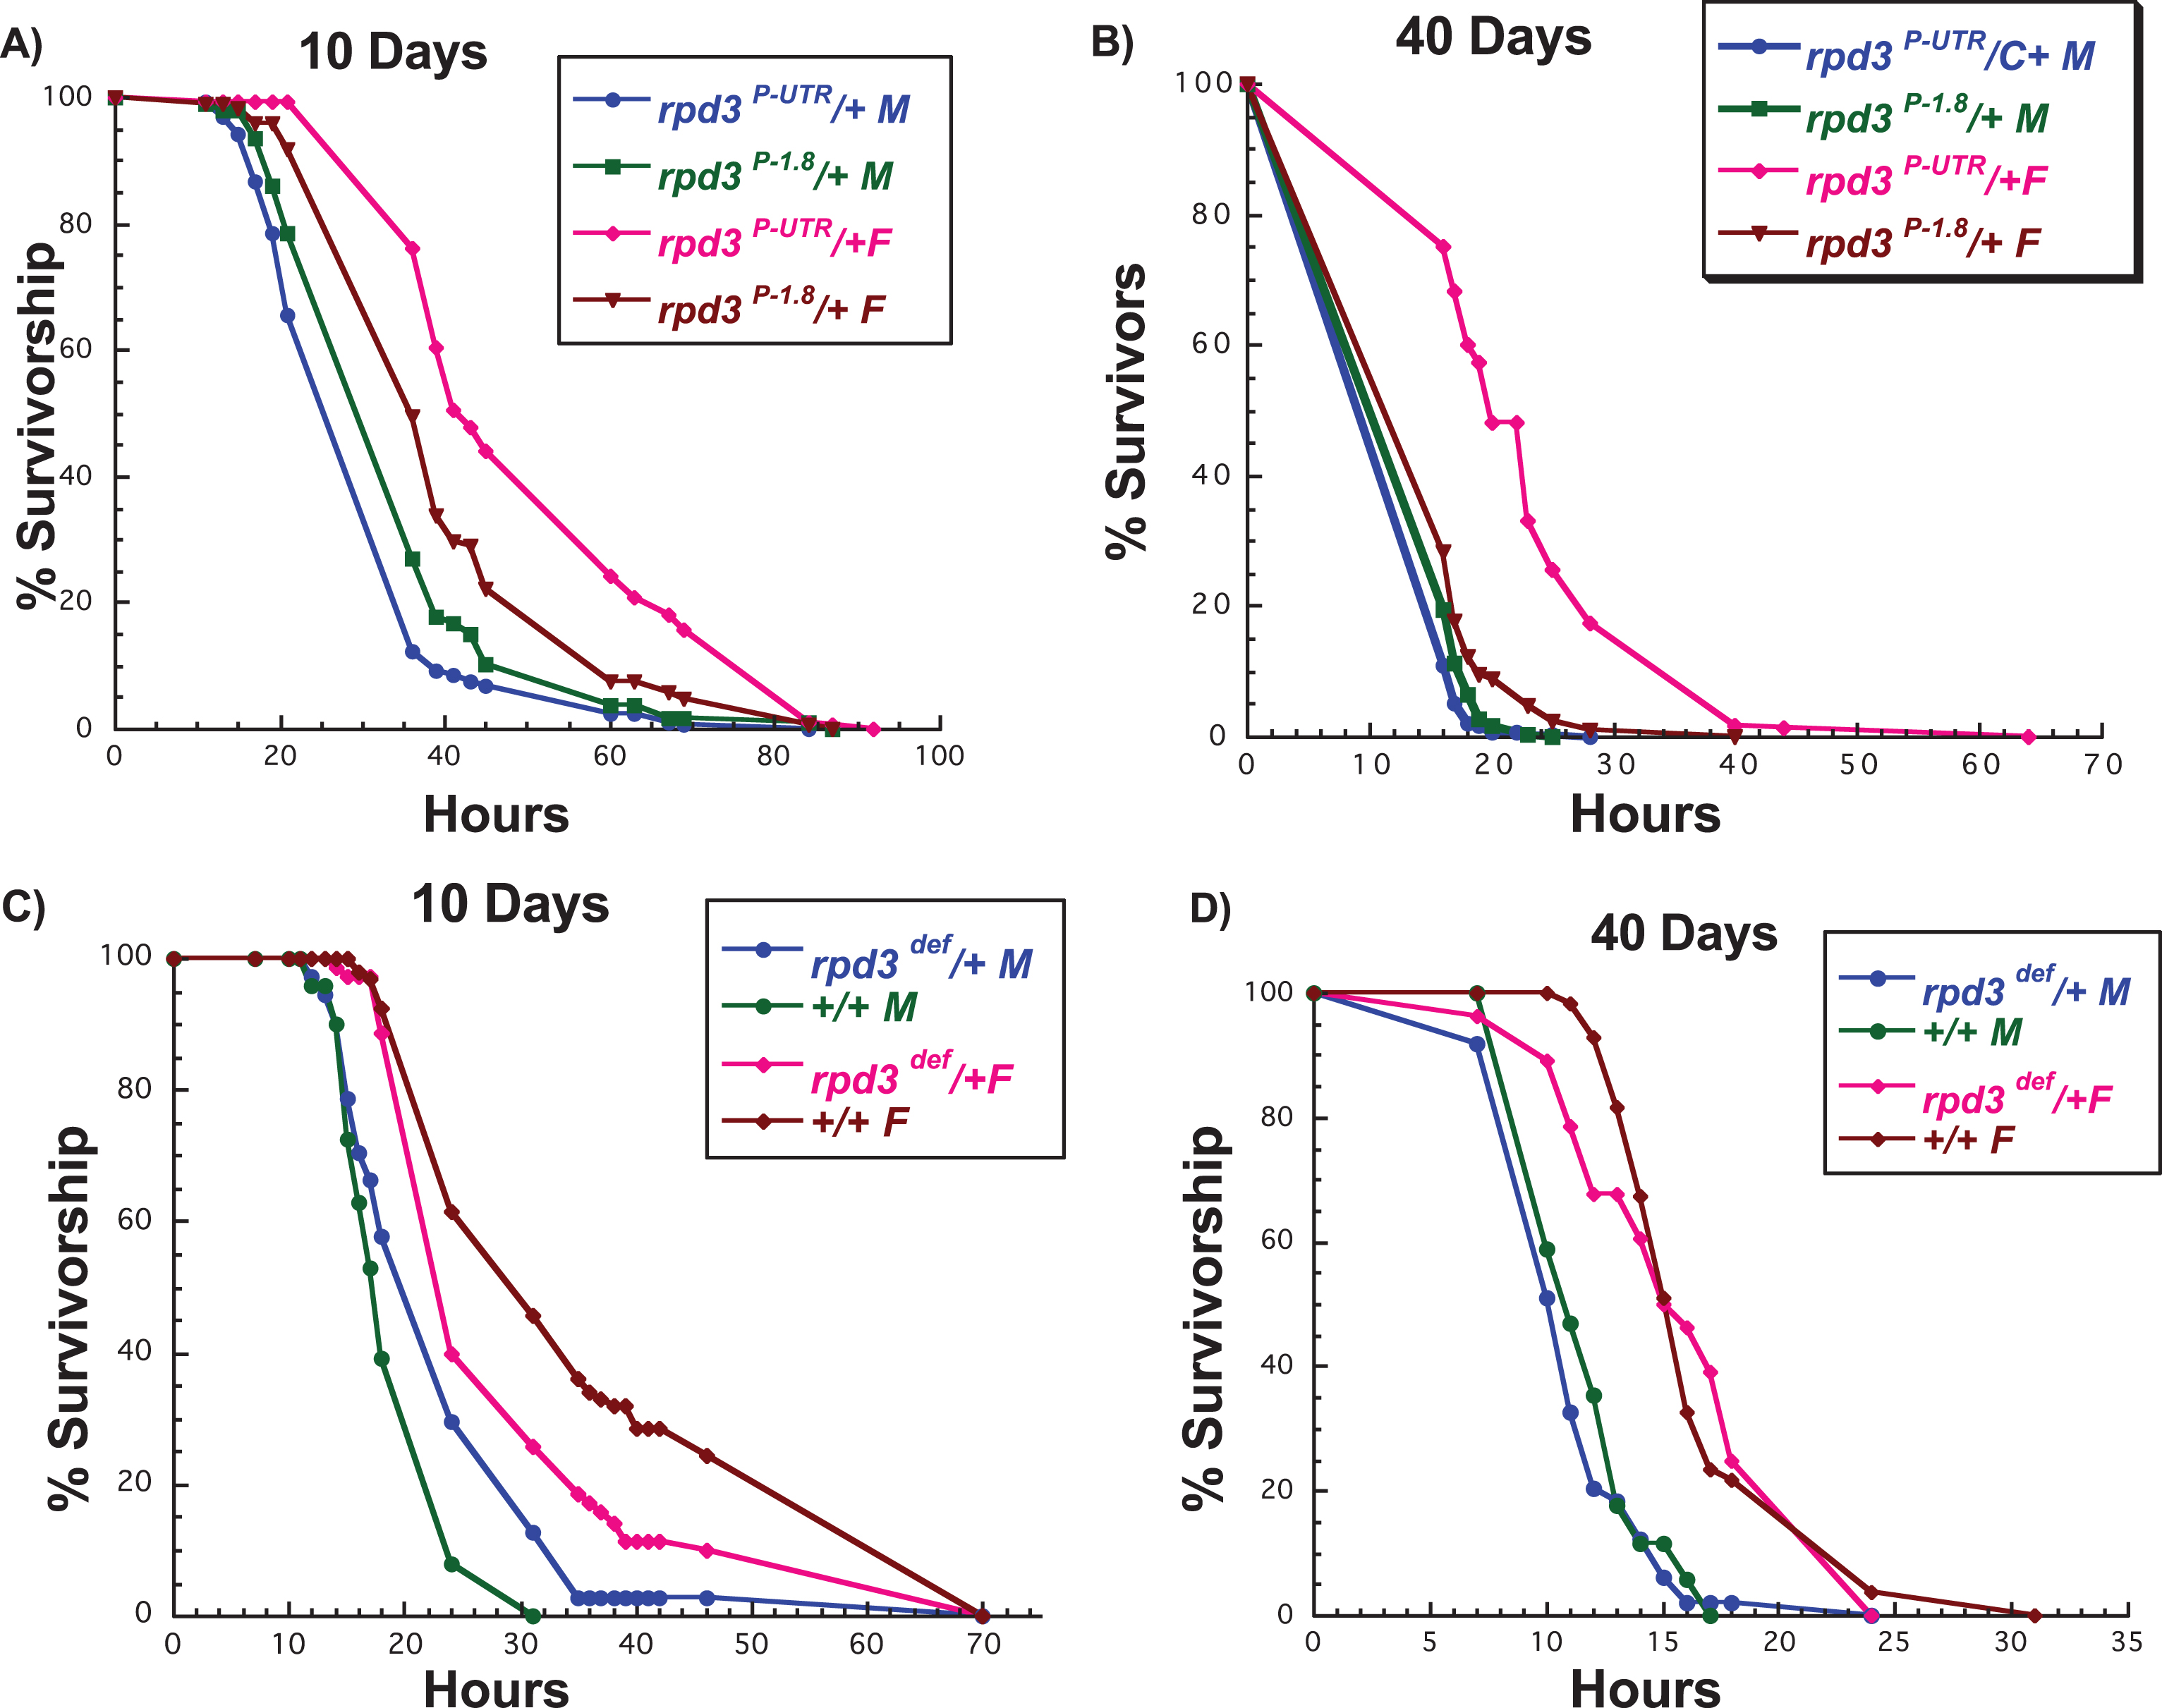 rpd3 reduction affects stress resistance in flies. (A, B) Survival curves for male and female rpd3P-UTR/+ (experimental) and rpd3P-1.8/+ (control) flies exposed to 20 mM paraquat at age 10 (A) or 40 (B) days. rpd3P-UTR/+ females are more resistant to paraquat at 10 and 40 days, but no changes in resistance were observed in male rpd3P-UTR/+ flies. (C, D) Survival curves for male and female rpd3def/+ and control flies exposed to 20 mM paraquat at age 10 (C) or 40 (D). Male rpd3def/+ flies are more resistant and female rpd3def/+ are less resistant compared to control flies at age 10. No difference in paraquat resistance was observed between rpd3def/+ male and female and control flies at 40 days.